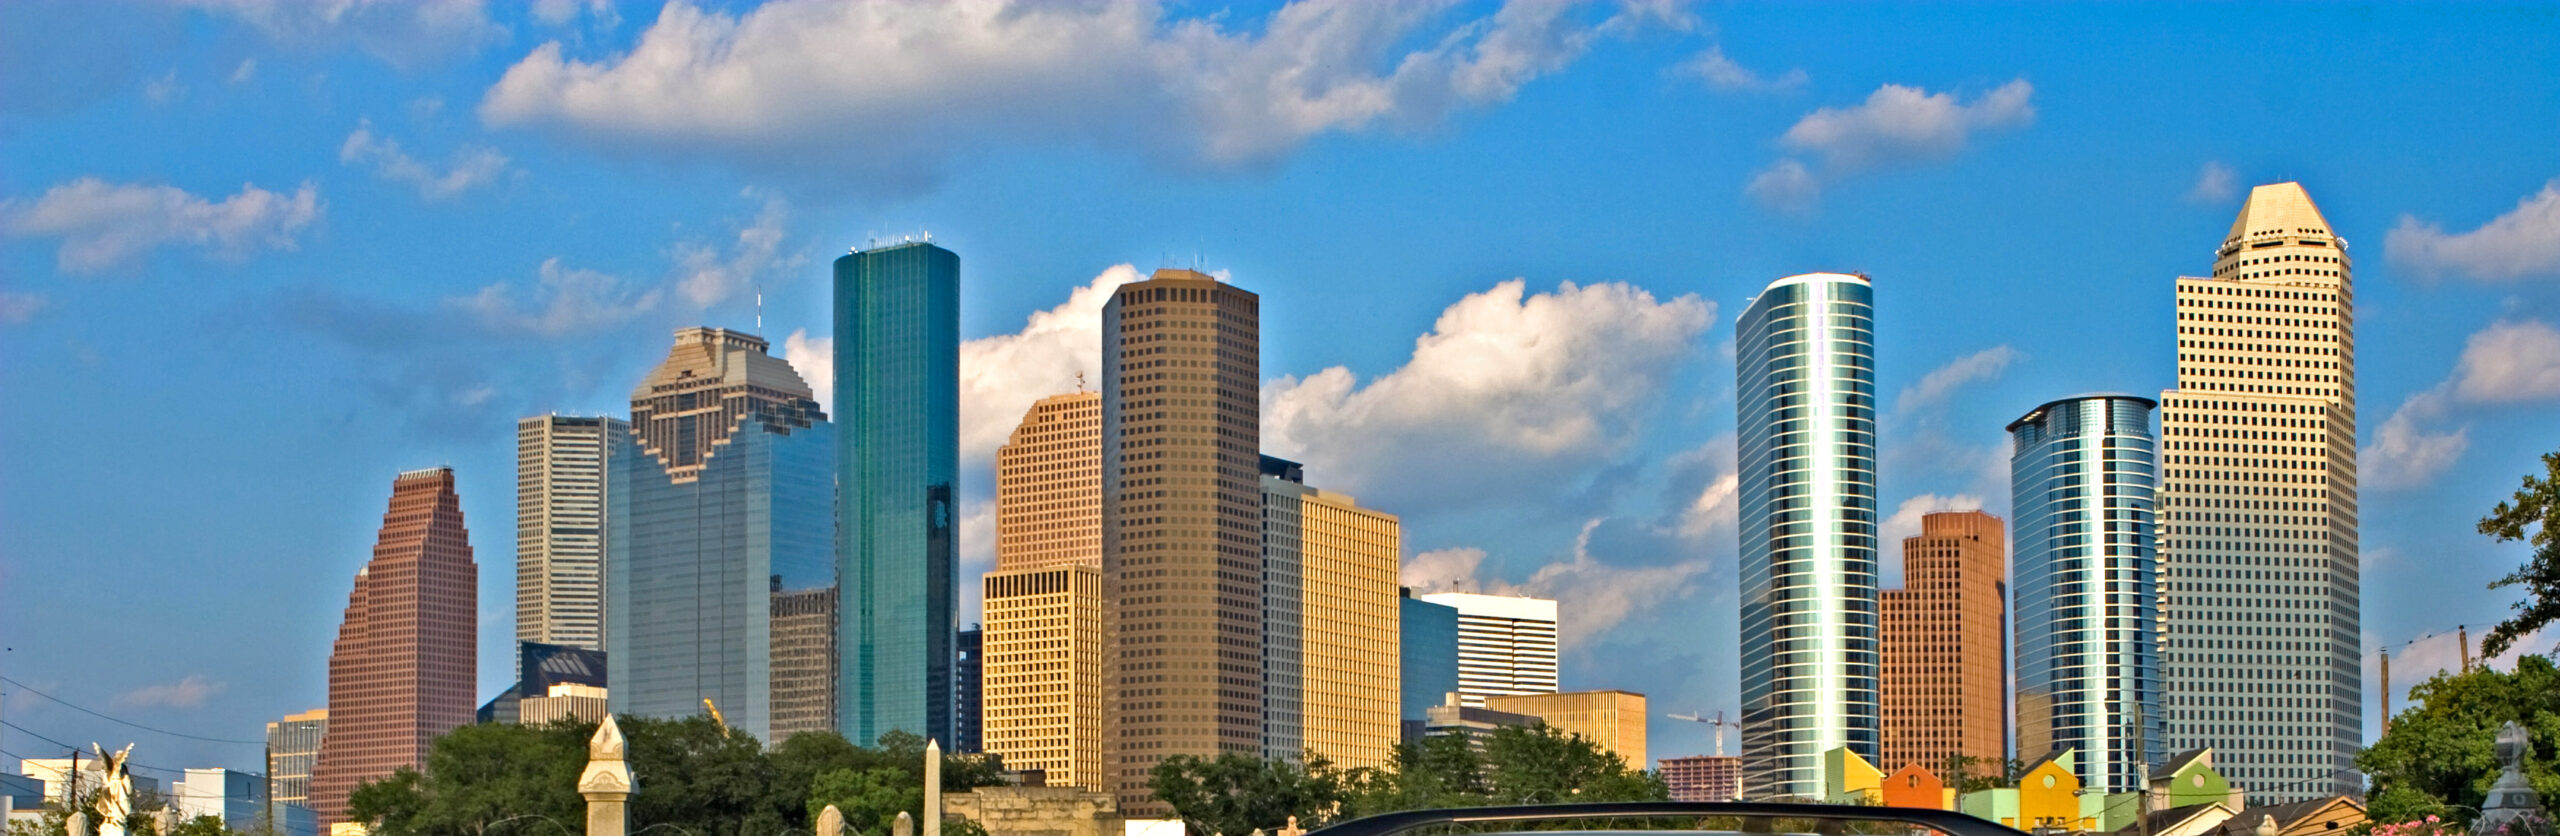 Houston city skyline in broad daylight with blue skies and some clouds